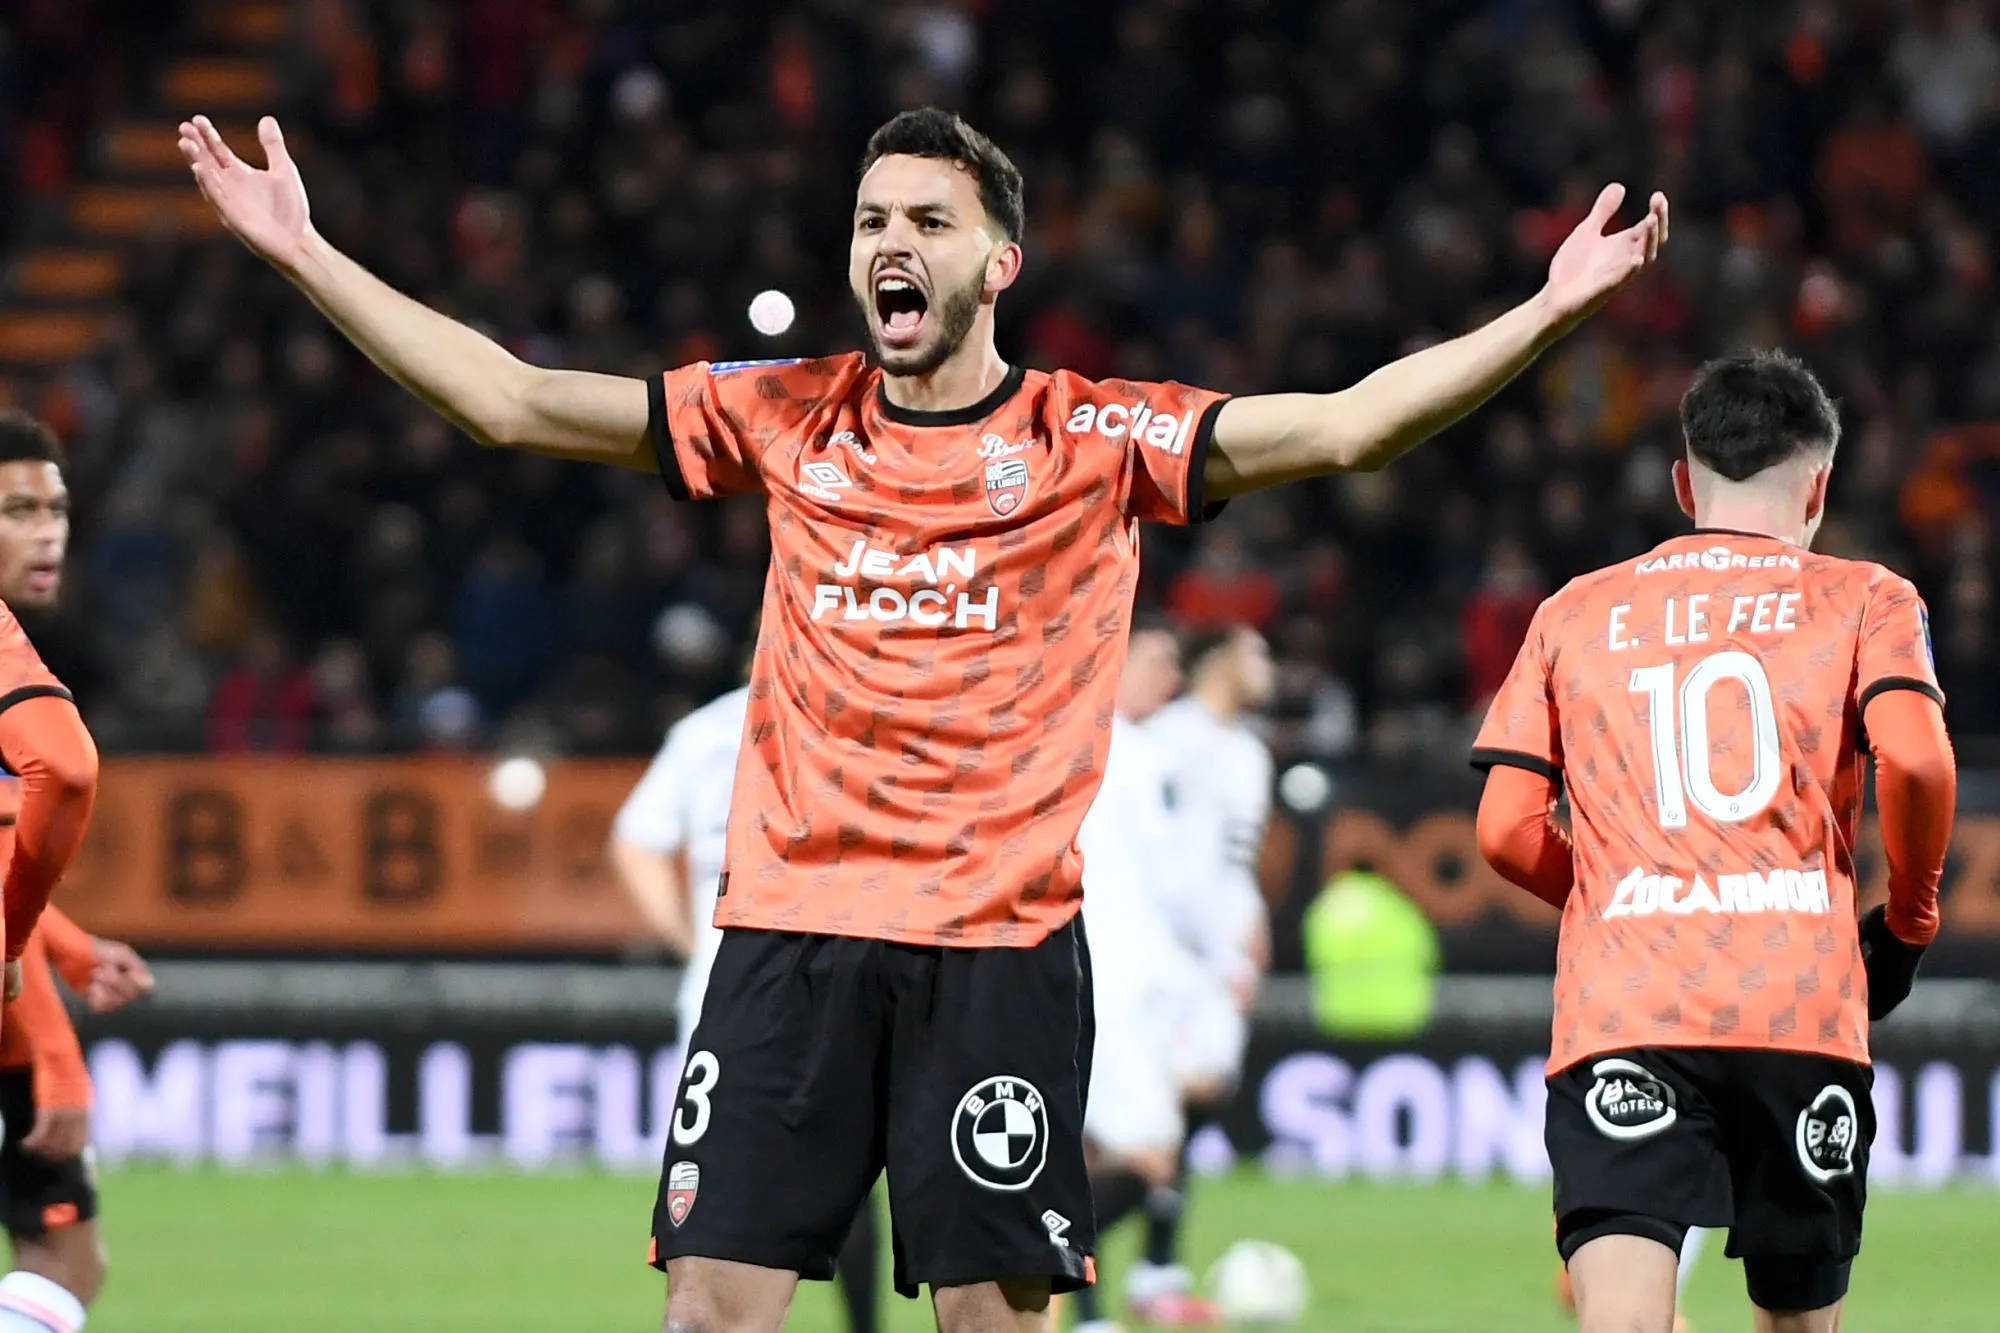 03 Montassar TALBI (fcl) during the Ligue 1 Uber Eats match between Lorient and Rennes at Stade du Moustoir on January 27, 2023 in Lorient, France. (Photo by Philippe Lecoeur/FEP/Icon Sport)